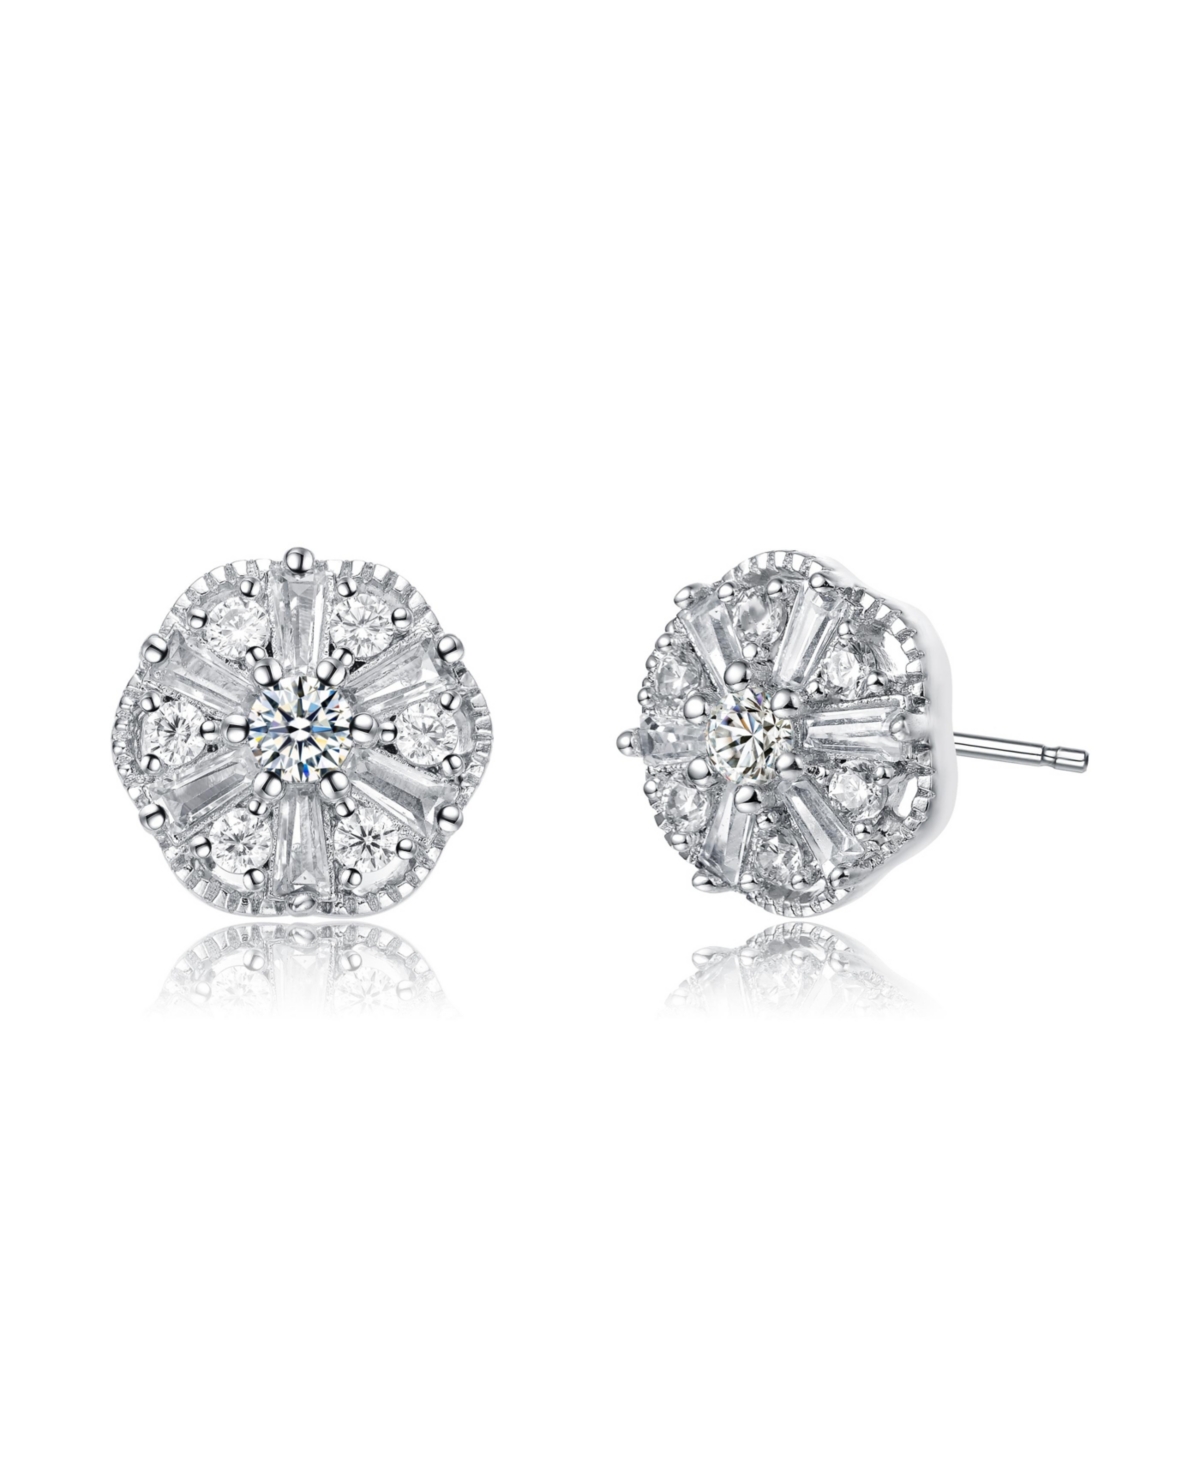 White Gold Plated Cubic Zirconia Stud Earrings - Clear